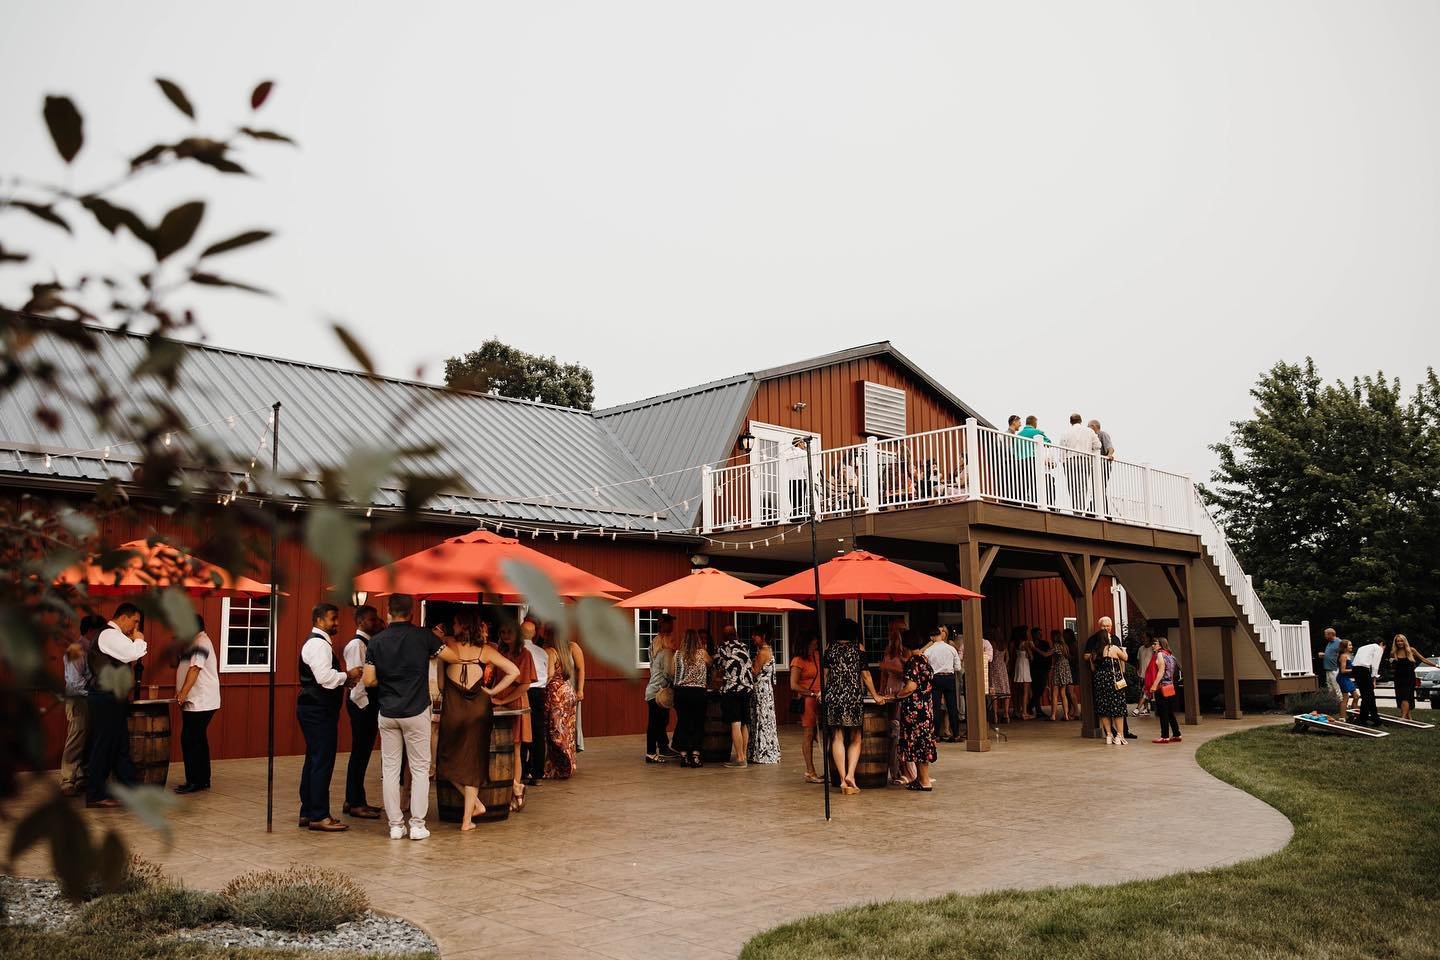 One of our most loved venue features, the outdoor cocktail area 🍻

Not only can guests enjoy the beautiful summer Wisconsin weather enjoying cocktails by ordering at our flip out bar window, but we also have yard games, outdoor seating, and a gas fi